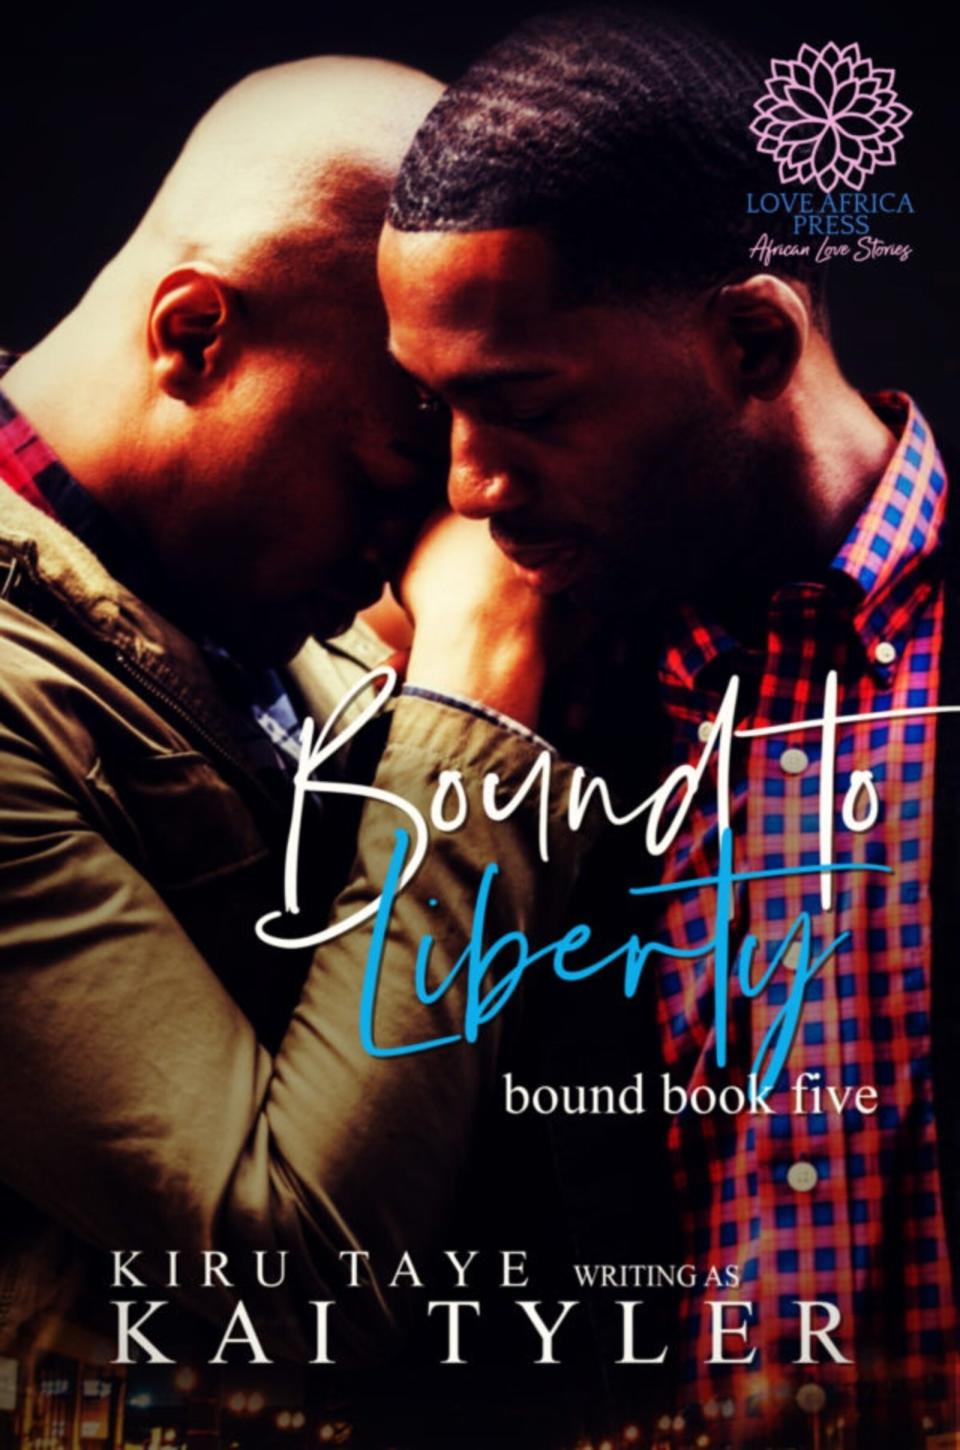 Book cover of Bound to Liberty by Kiru Tyler